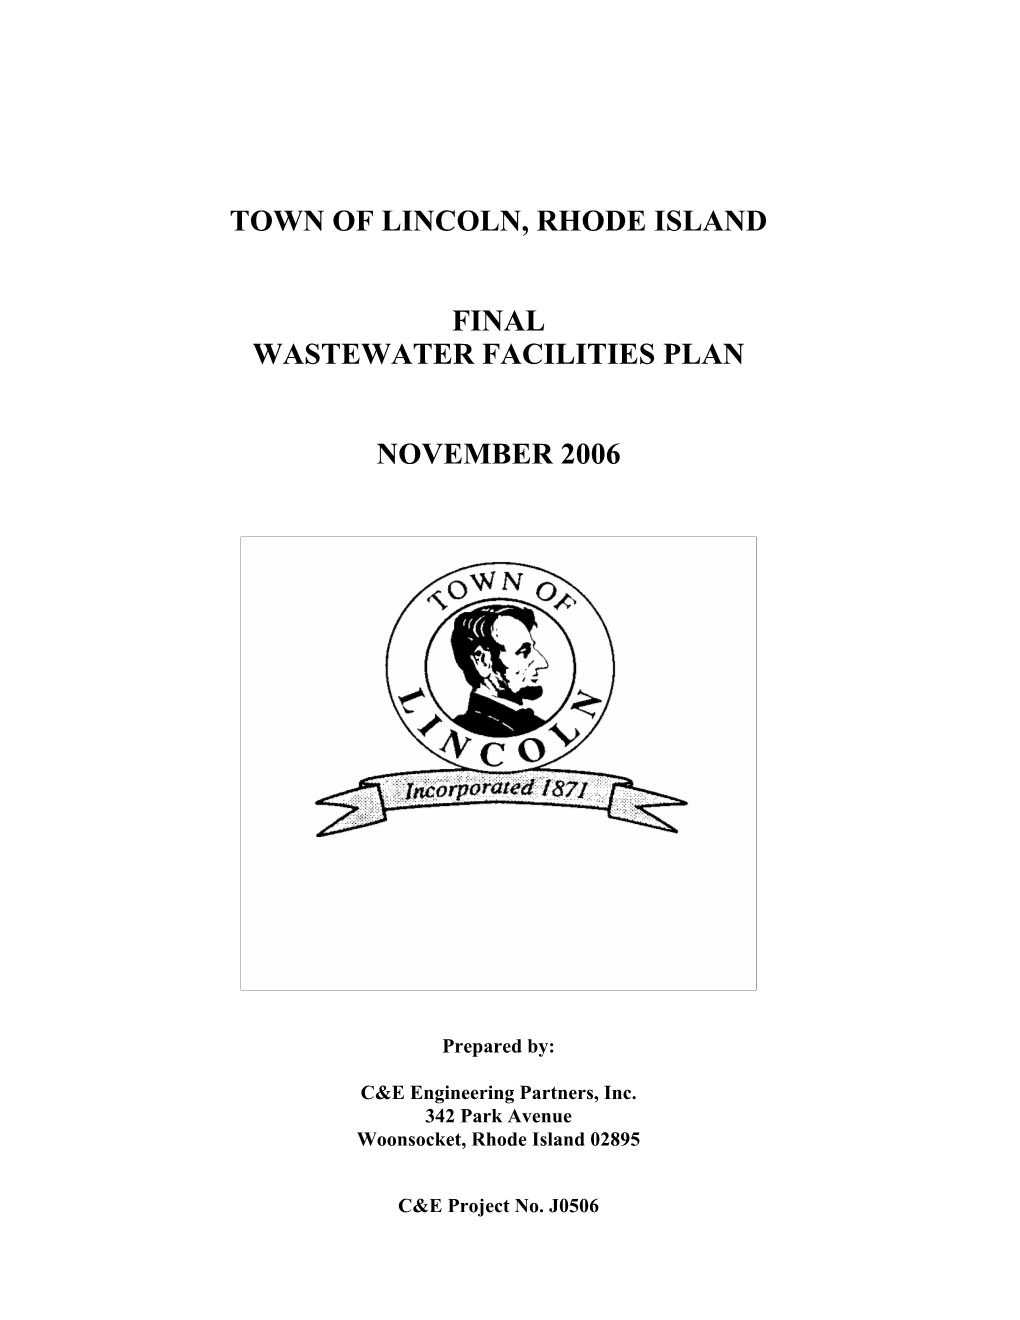 Town of Lincoln, Rhode Island Final Wastewater Facilities